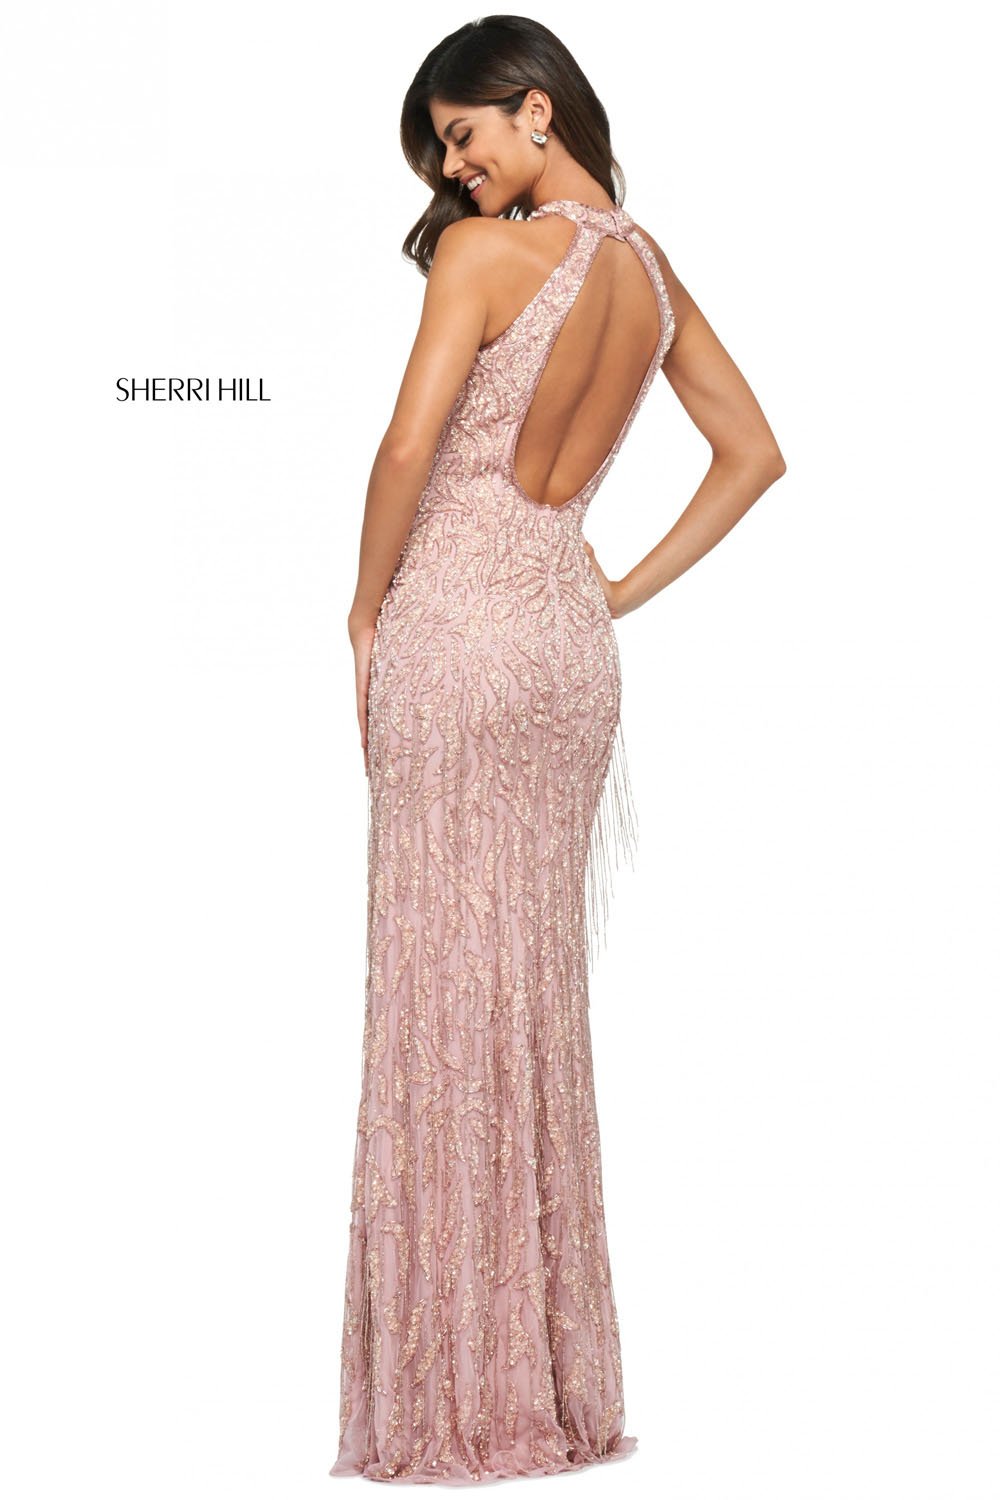 Sherri Hill 53882 dress images in these colors: Light Pink, Burgundy, Black, Periwinkle.